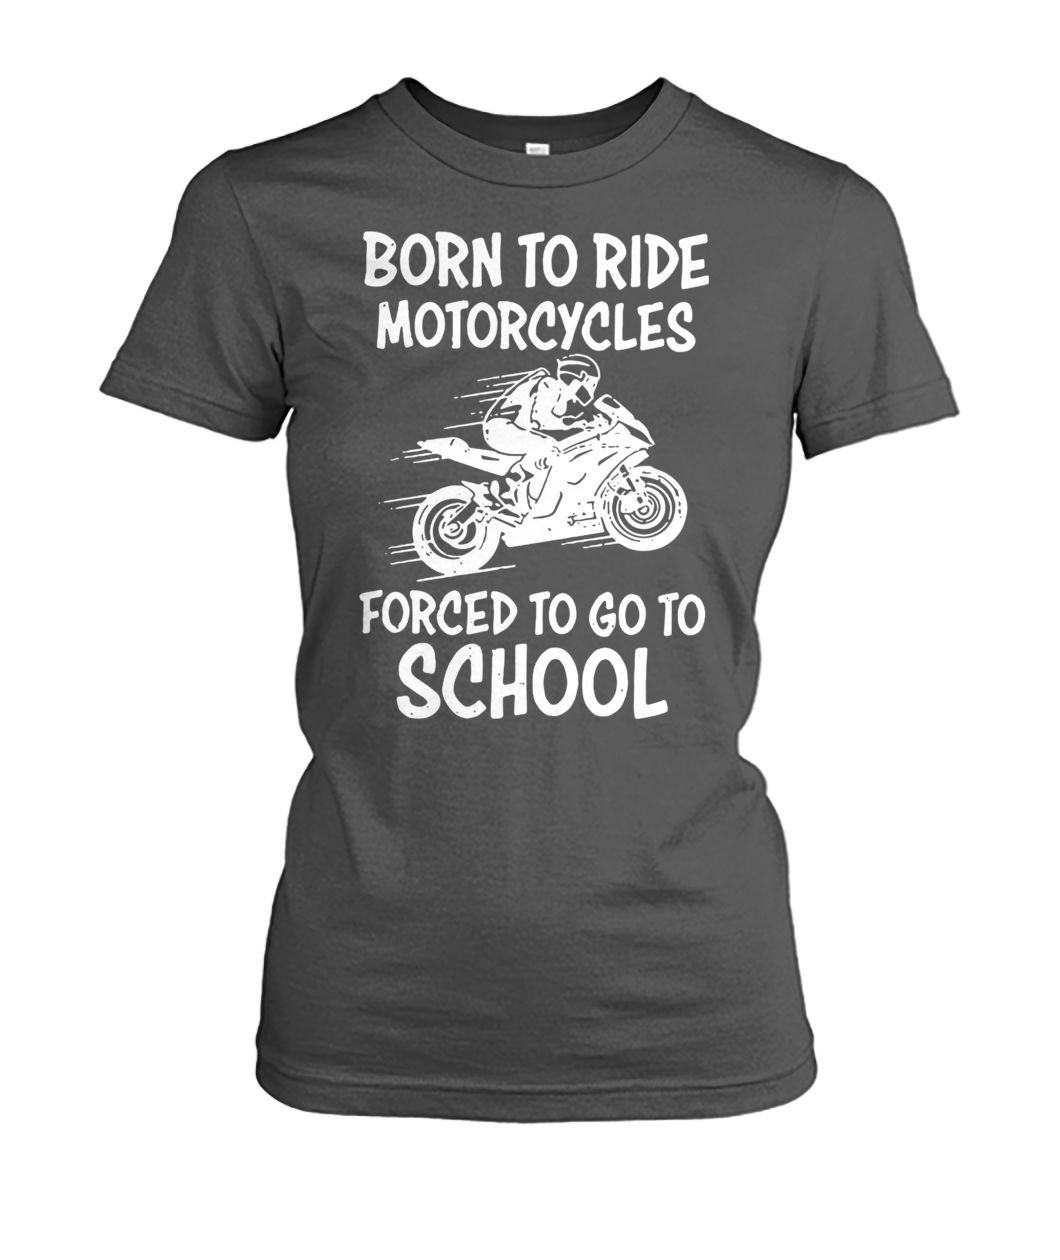 Born to ride motorcycles forced to go to school women's crew tee